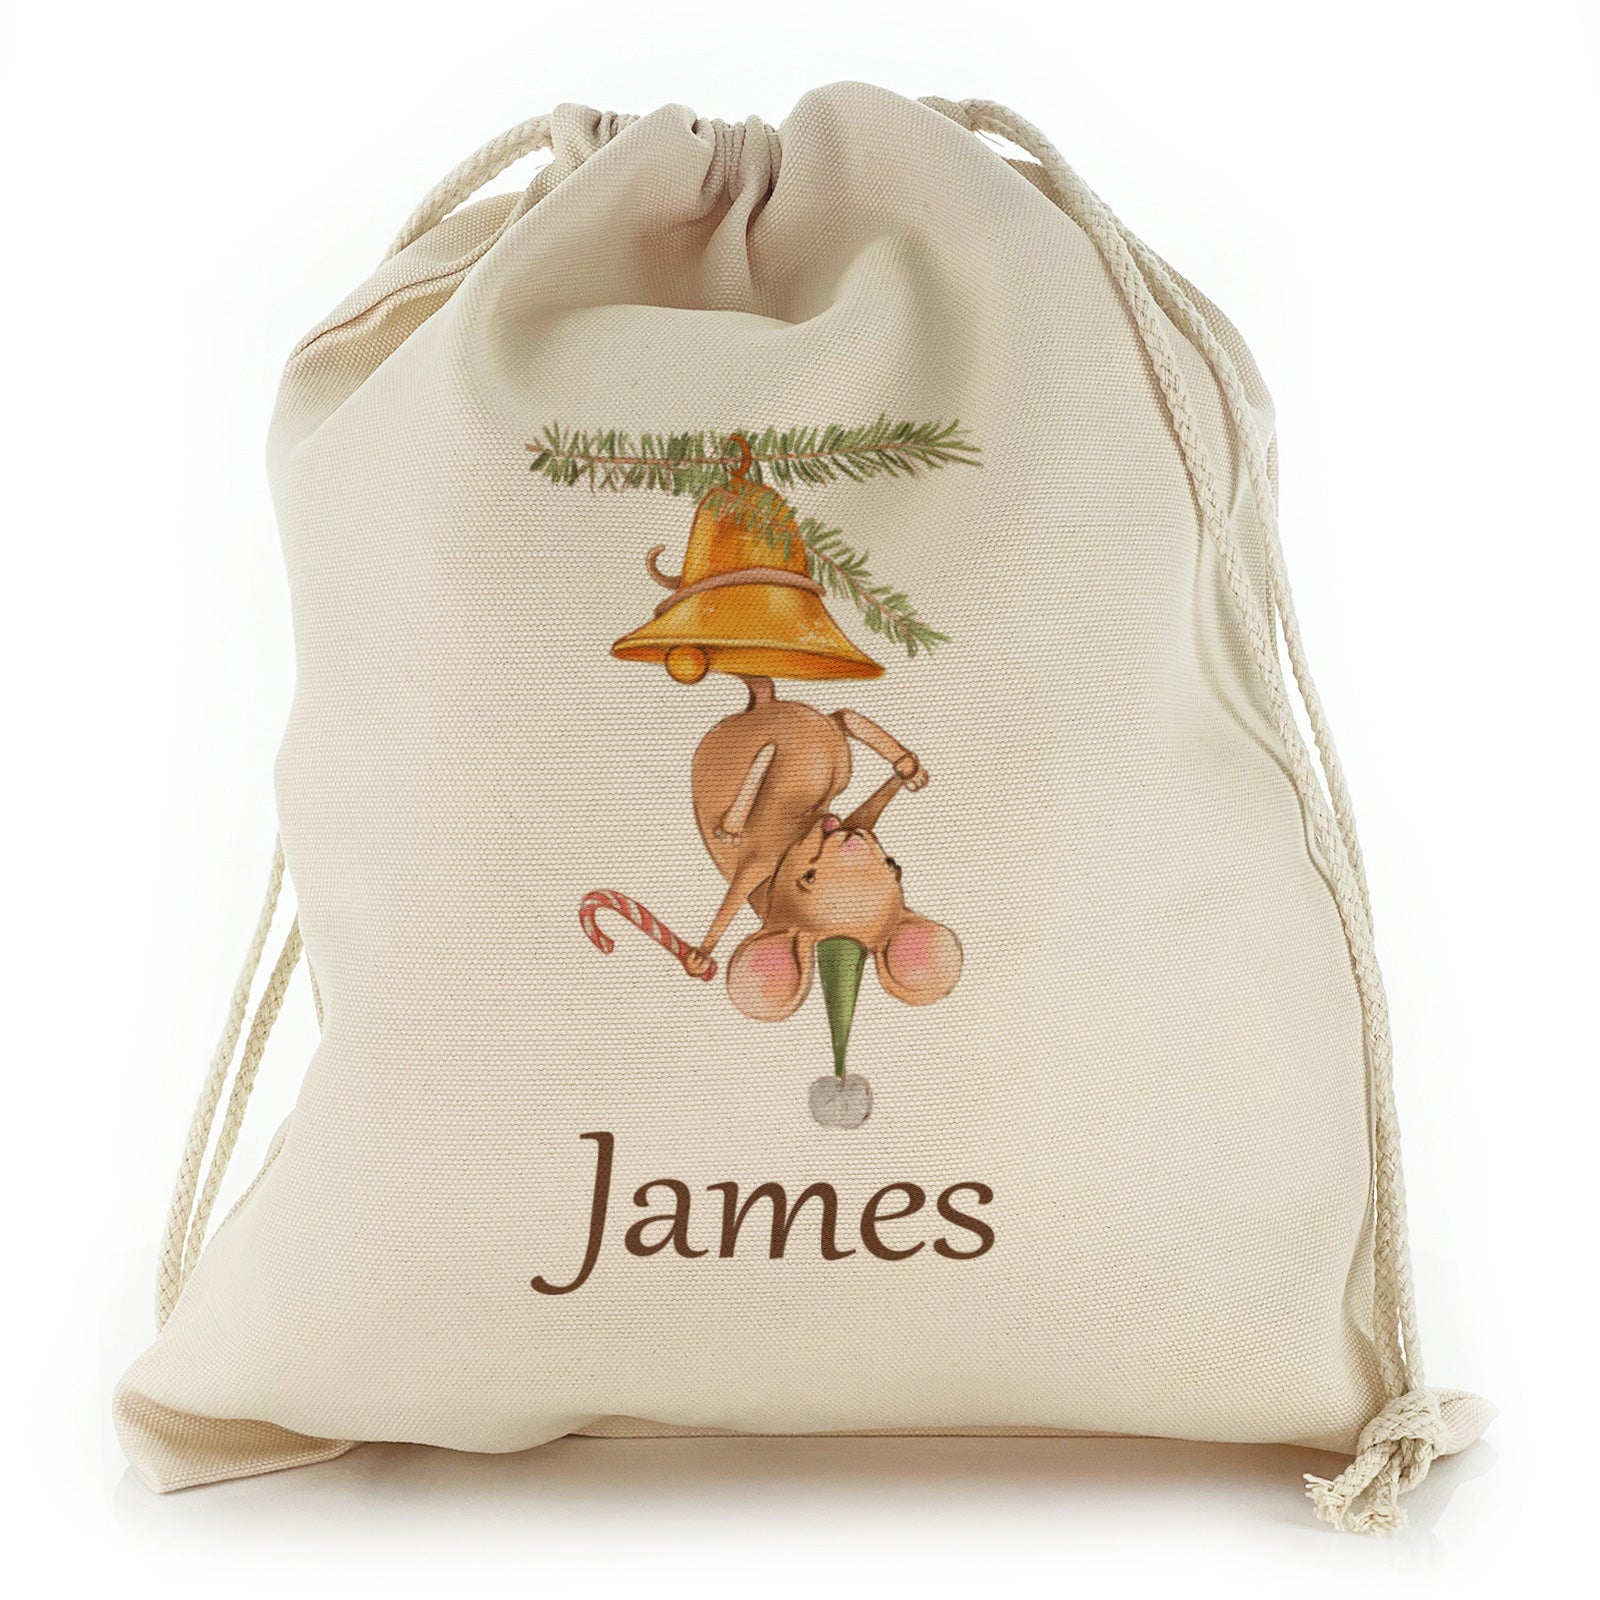 Personalised Canvas Sack with Cute Text and Playful Mouse in Bell